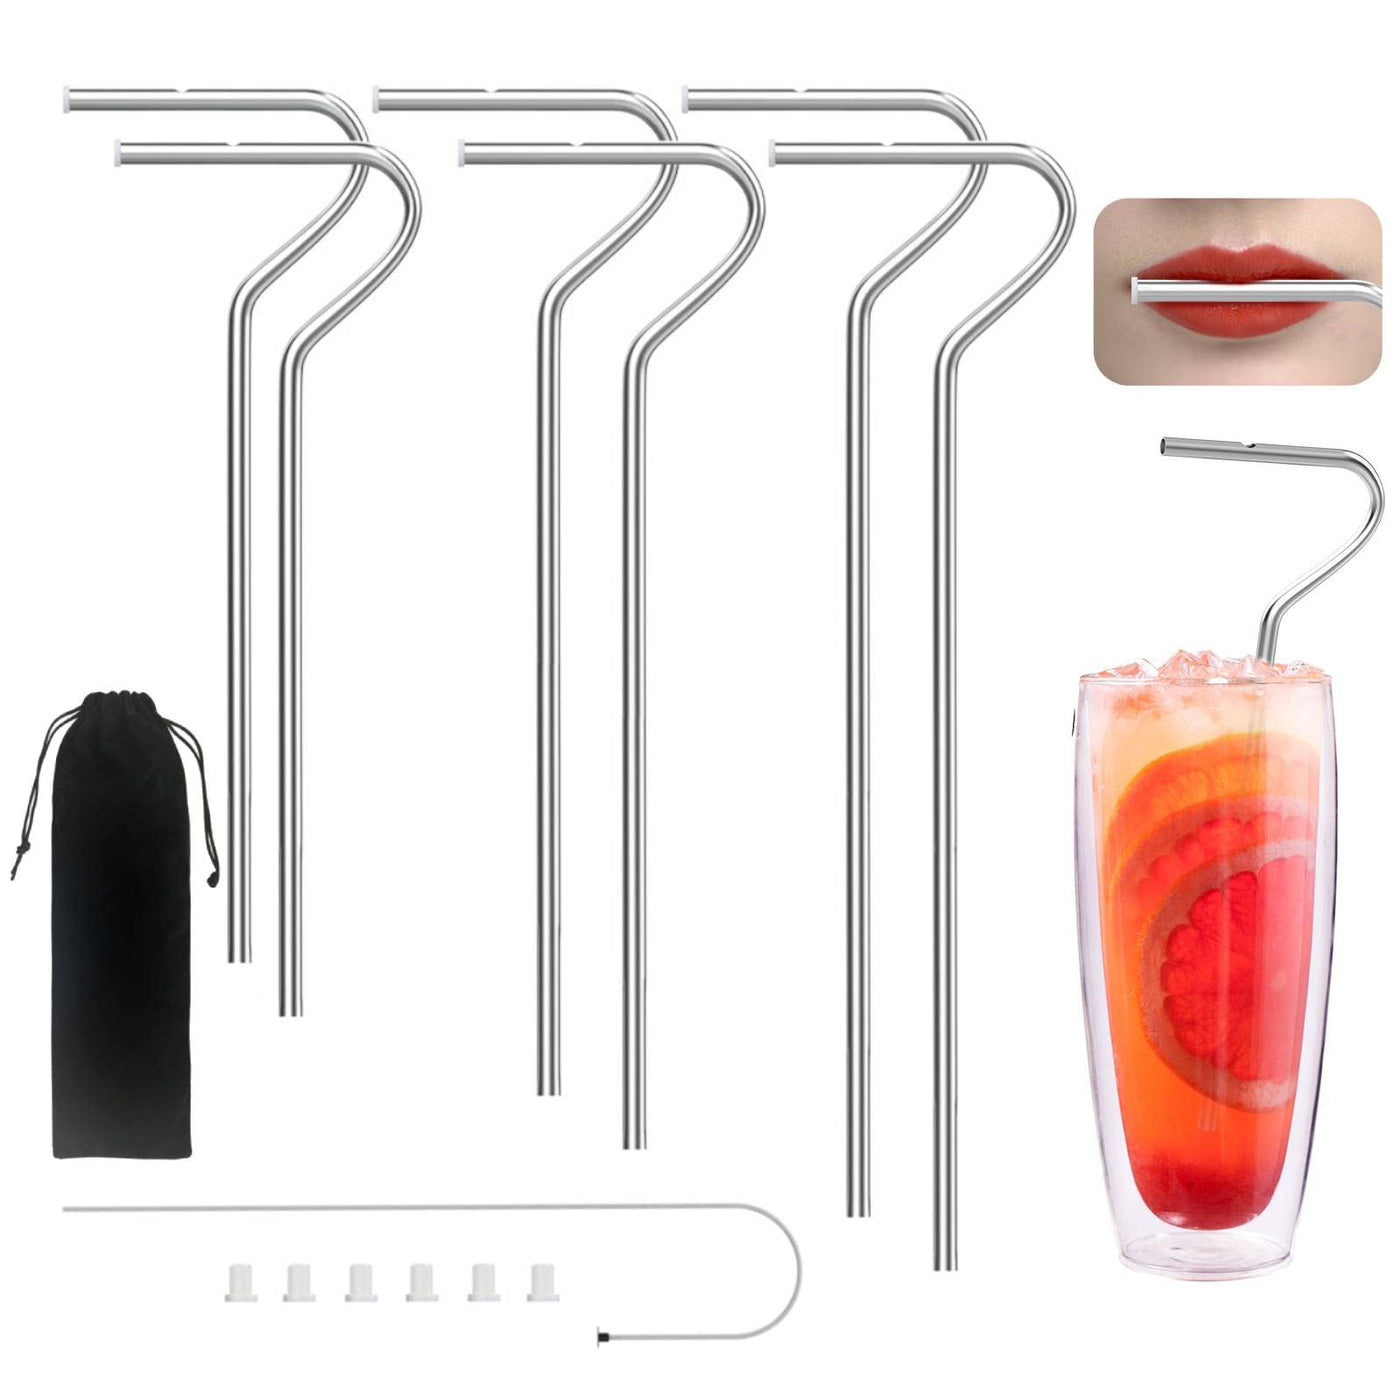 OUTXE Anti Wrinkle Straw 6 Pcs, Reusable Stainless Steel Drinking Straw, Wrinkle Free Long bended Metal Straw for Lip with Cleaning Brush and Carrying Bag, Fit Stanley Cup